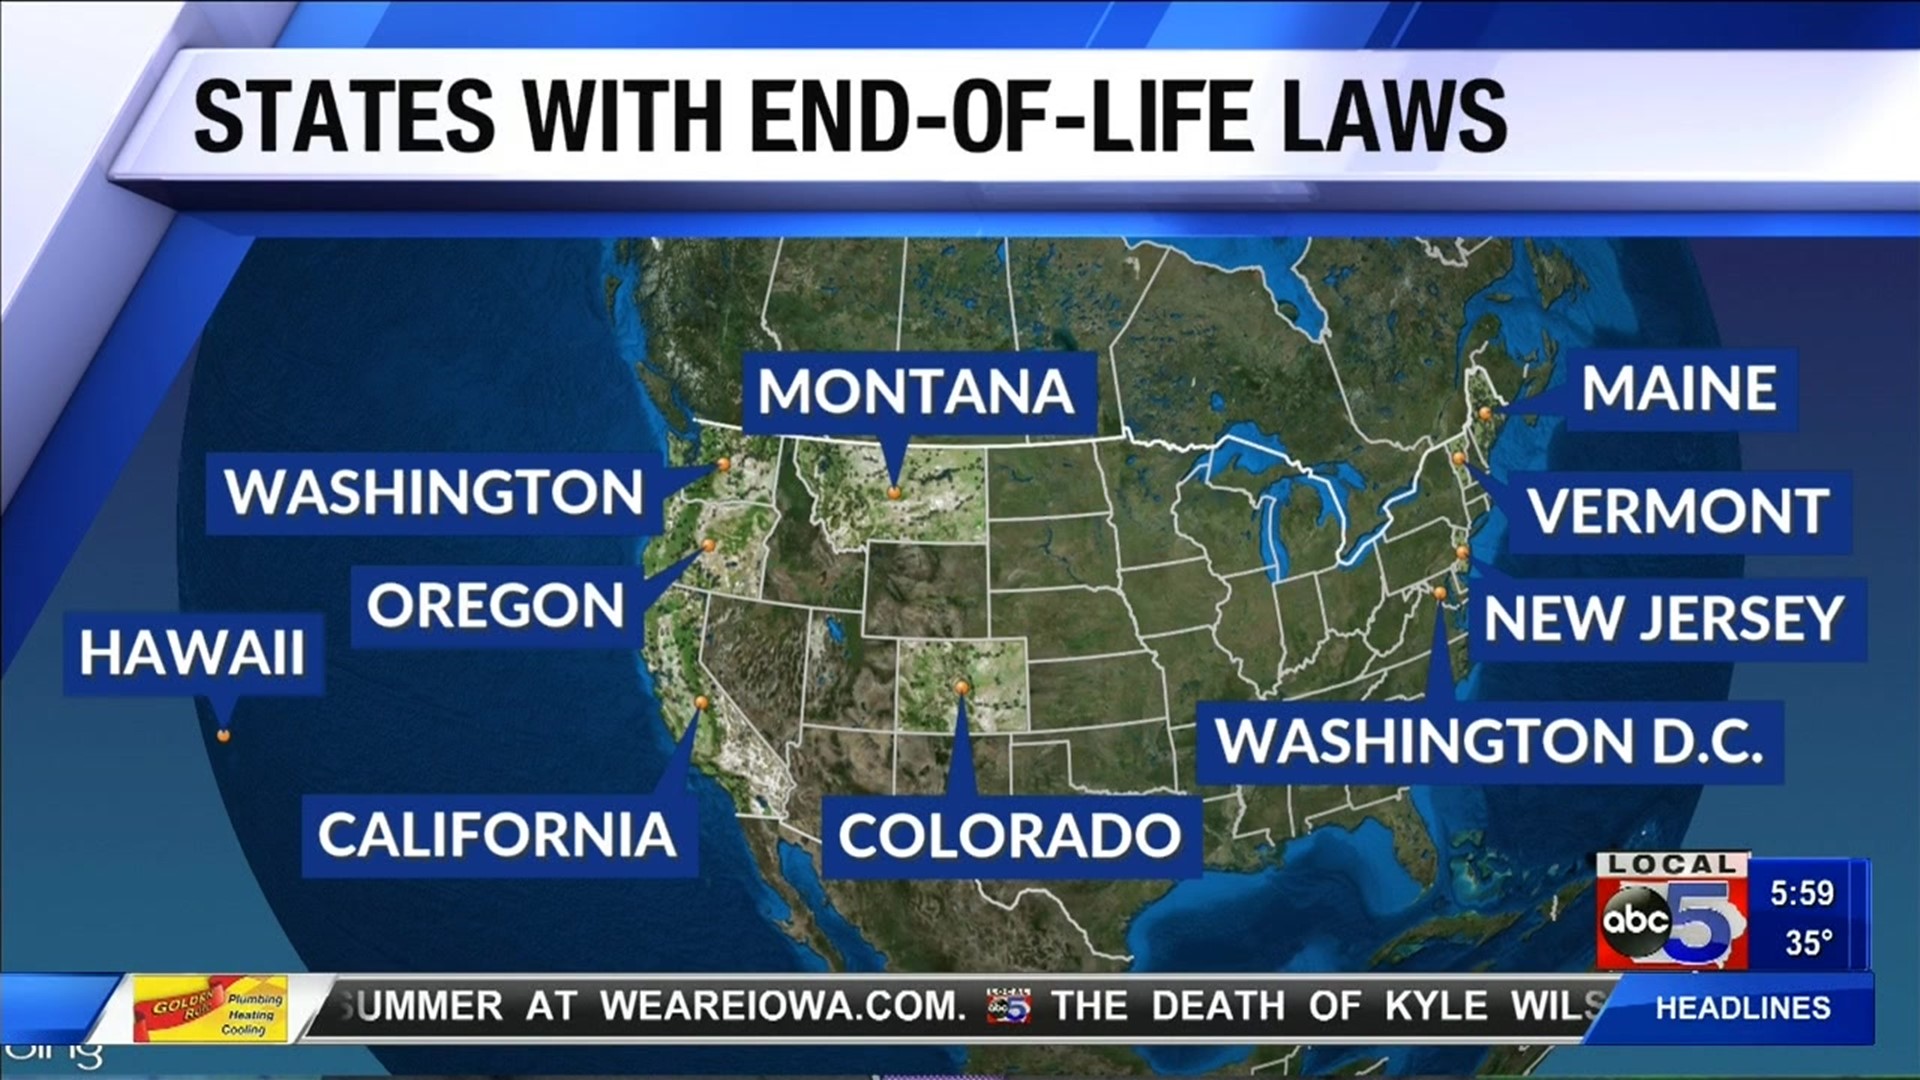 End-of-Life Options Act proposed in Iowa